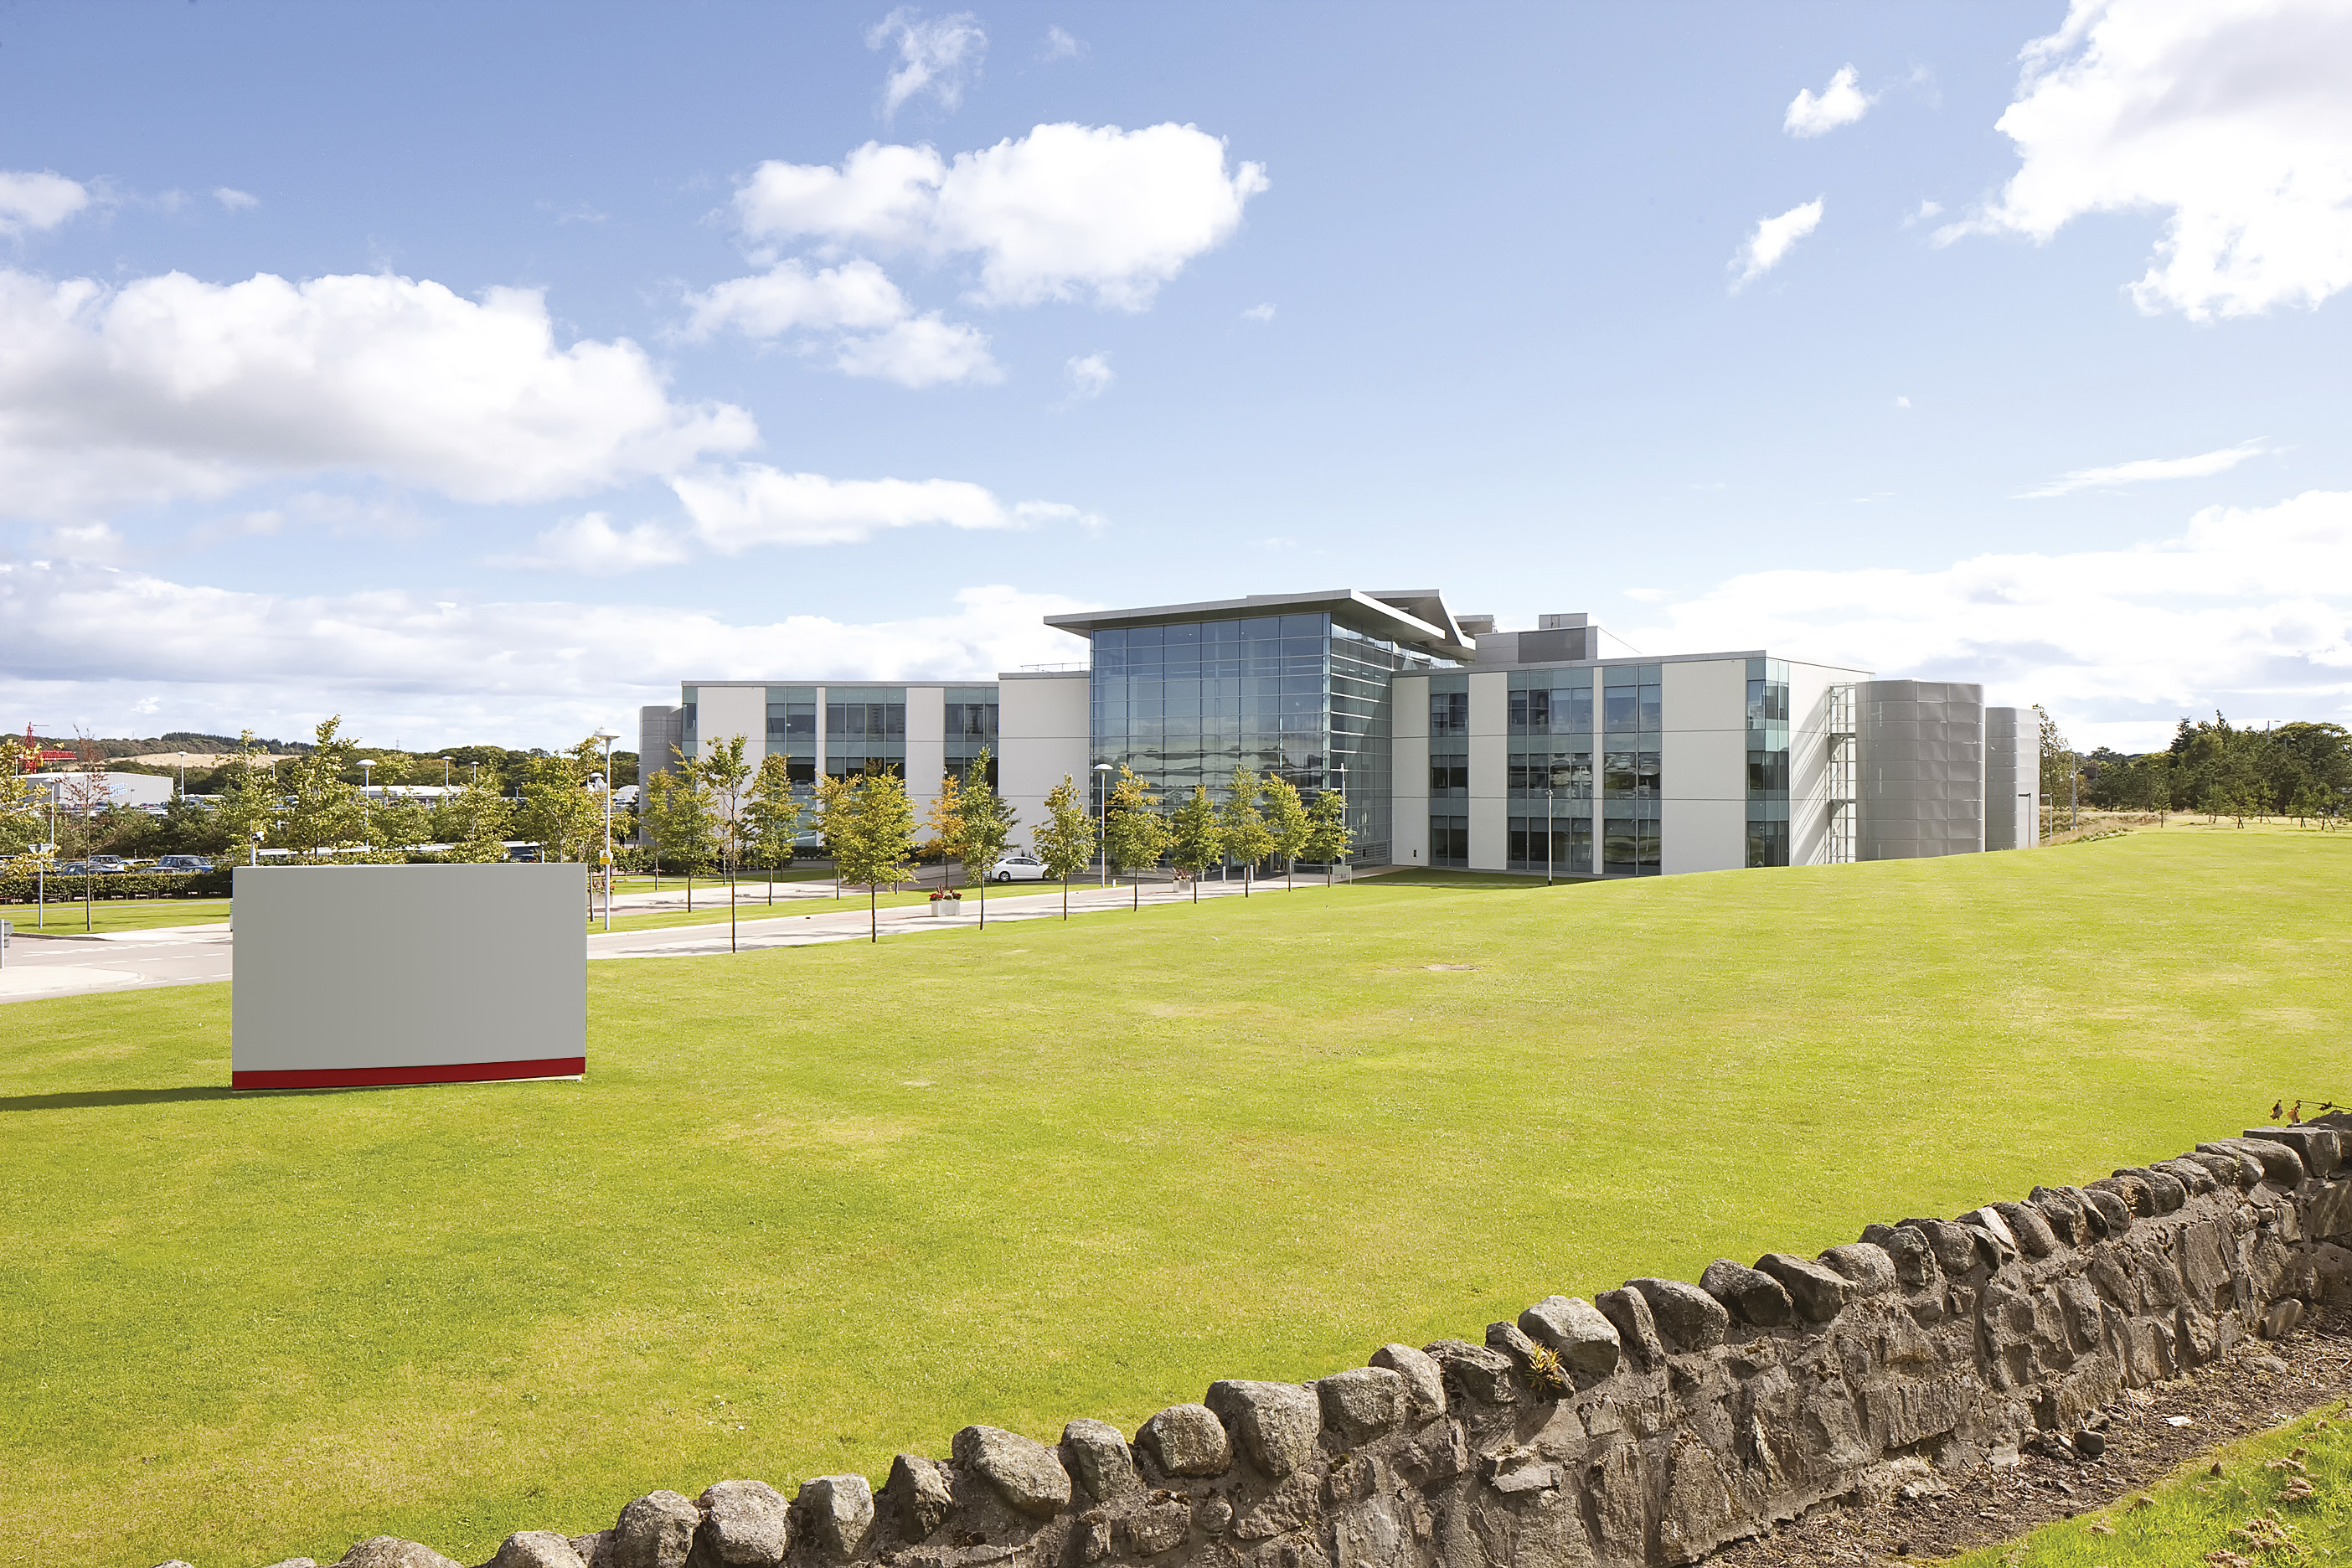 Sustainability plans mark next chapter for iconic Aberdeen campus